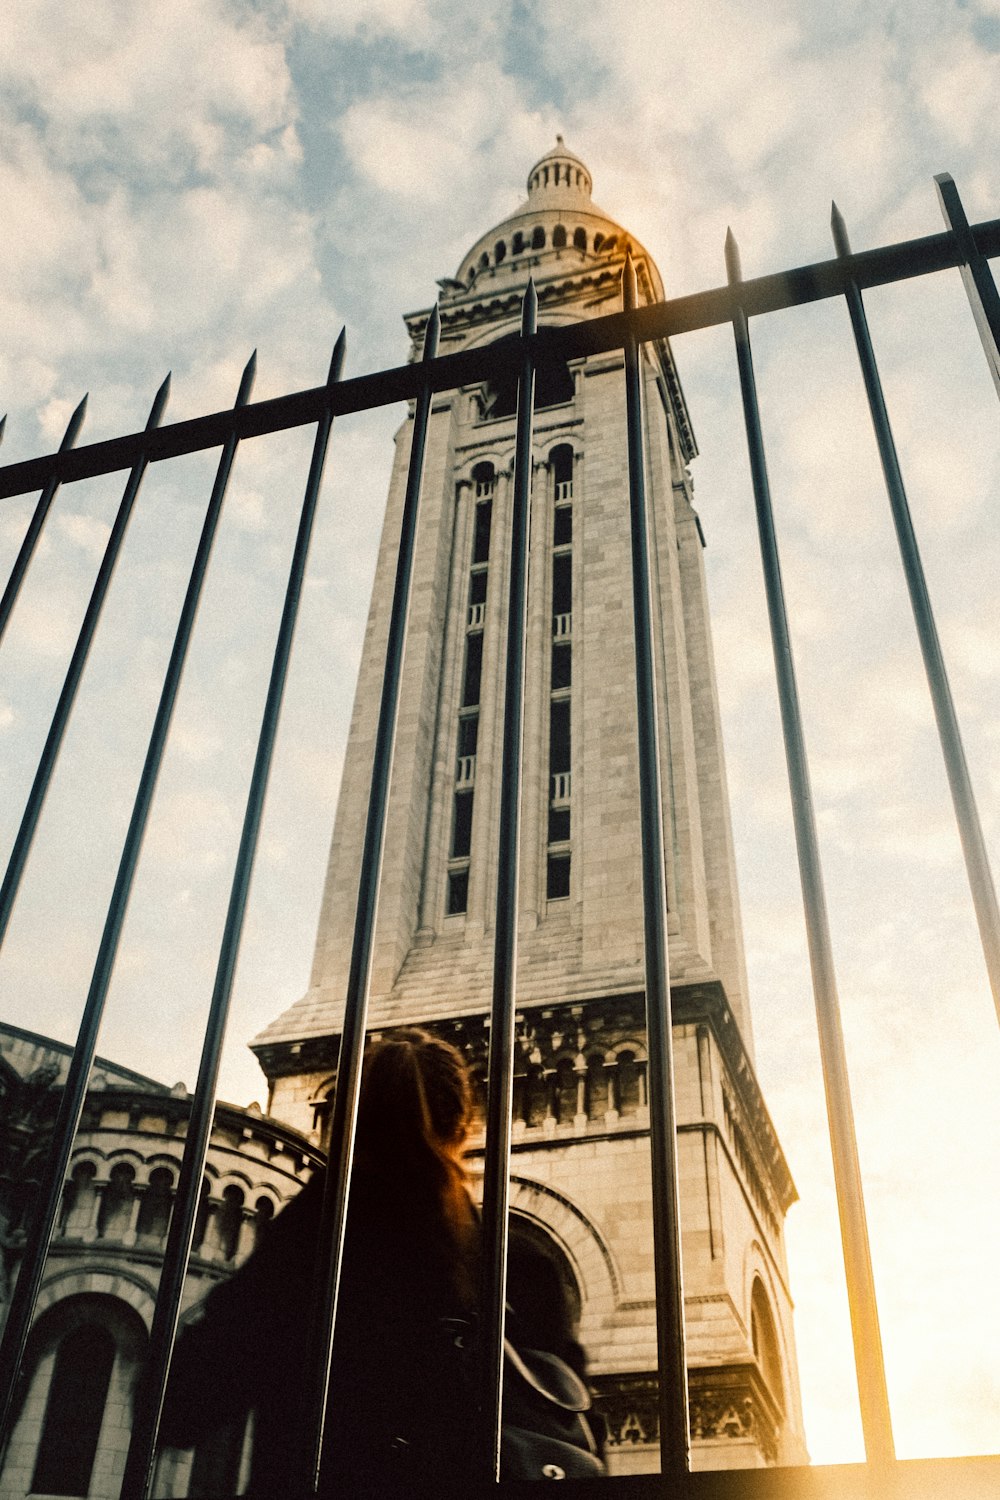 a tall building with a clock tower behind a fence